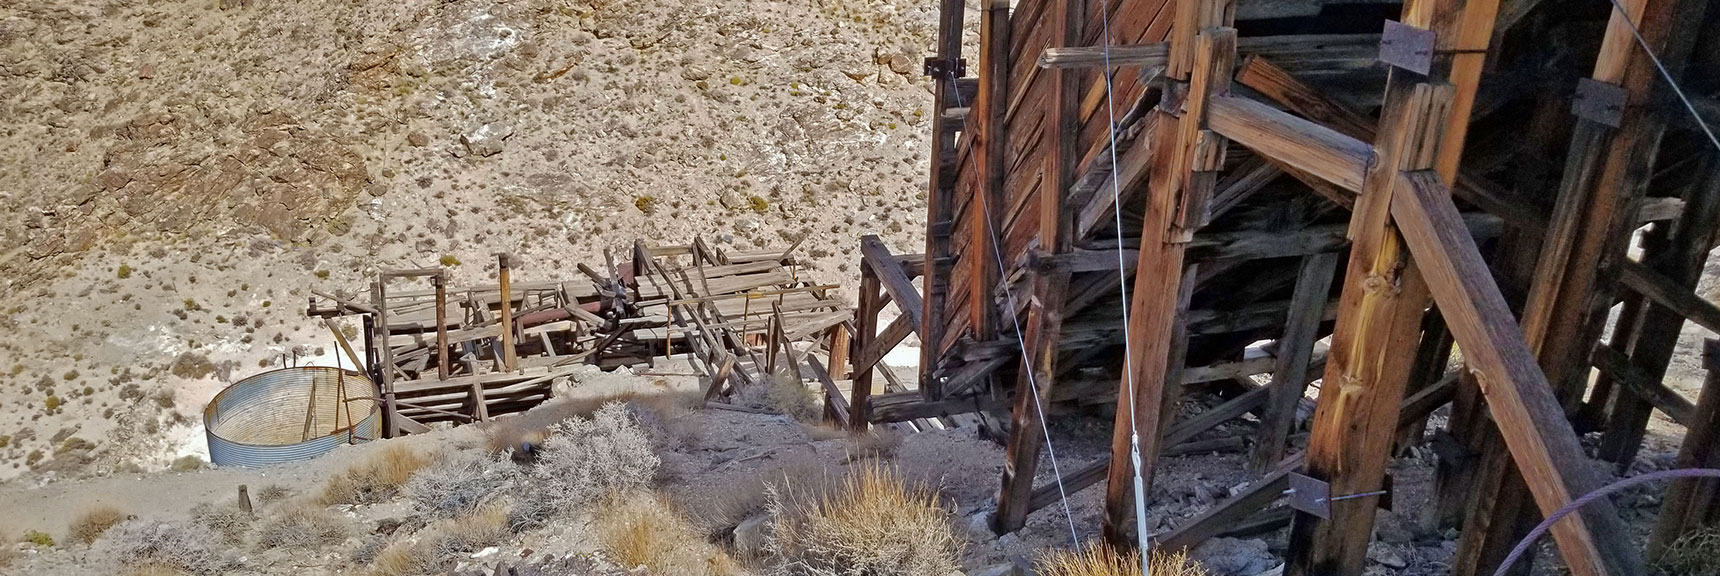 View from Above Skidoo Stamp Mill. Note the New Support Cables | Skidoo Stamp Mill, Panamint Mountains, Death Valley National Park, CA